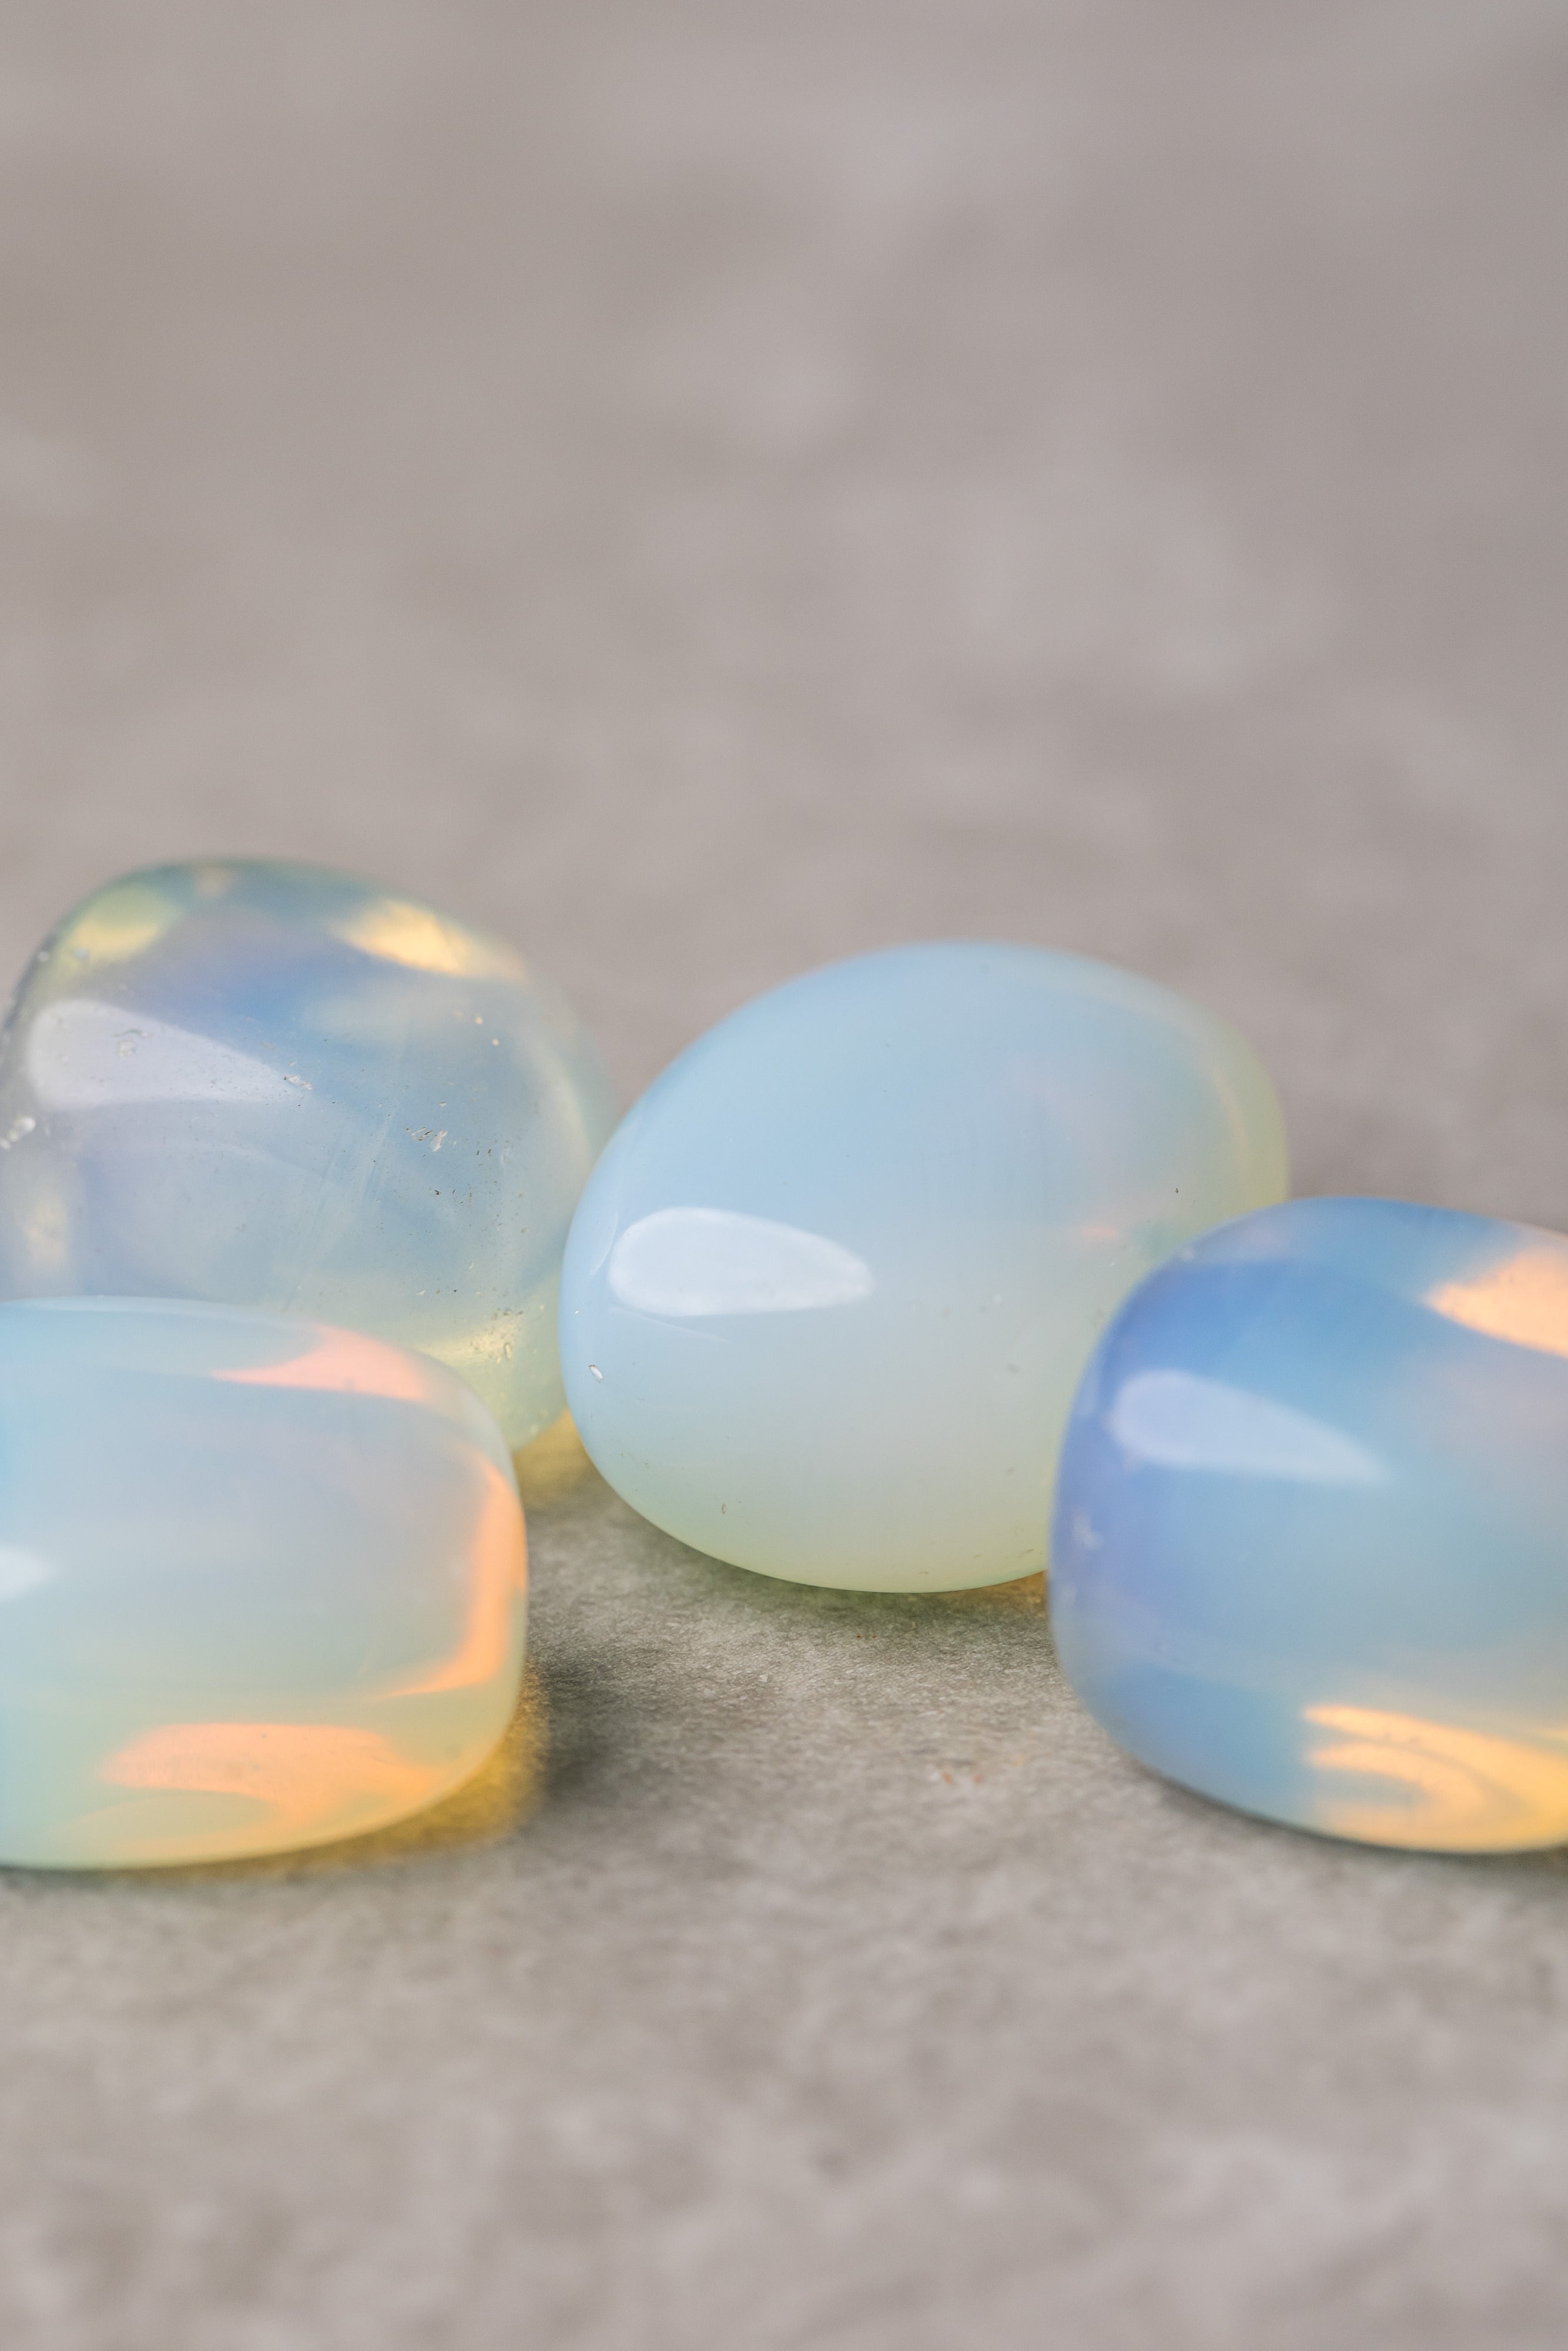 Opalite - Soothing Stone for Emotional Balance and Spiritual Growth - Everyday Rocks